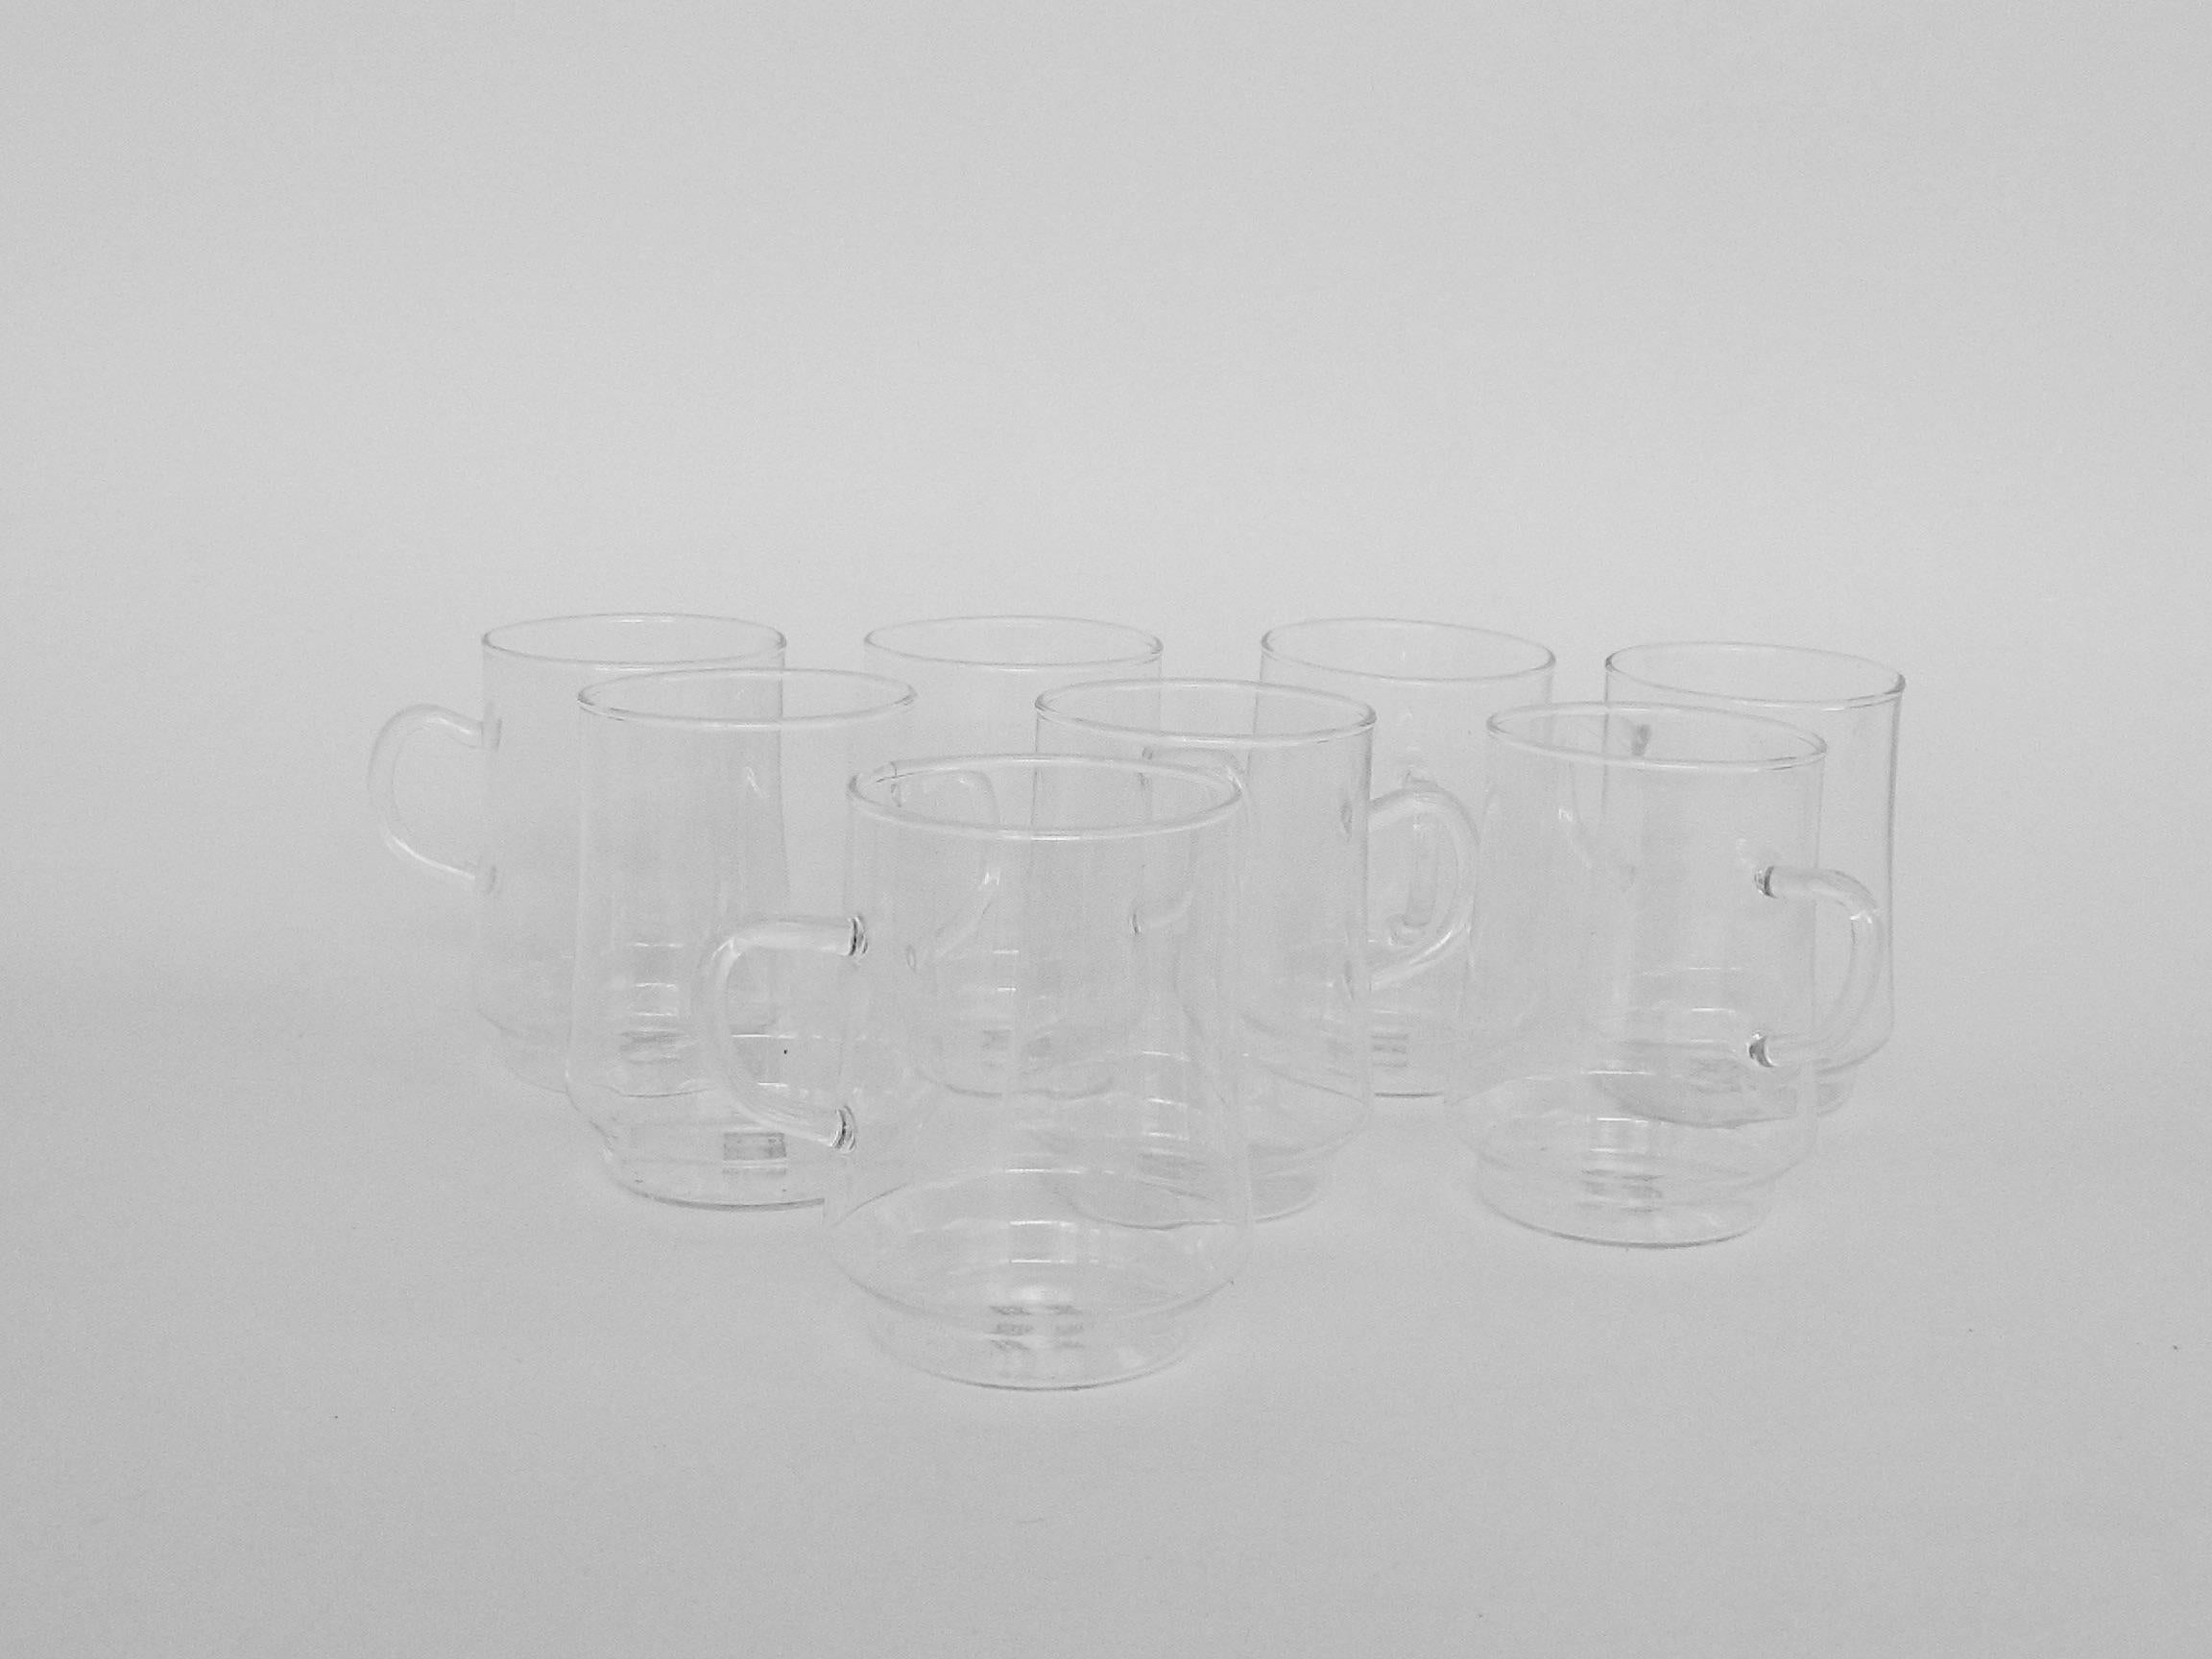 Set of eight tea, coffee or toddy drinks cups with handles. Fine delicate but strong Jena glass taper inward from the bottom upwards.
Jena glass (German: Jenaer Glas) is a shock- and heat-resistant glass used in scientific, technological as well as